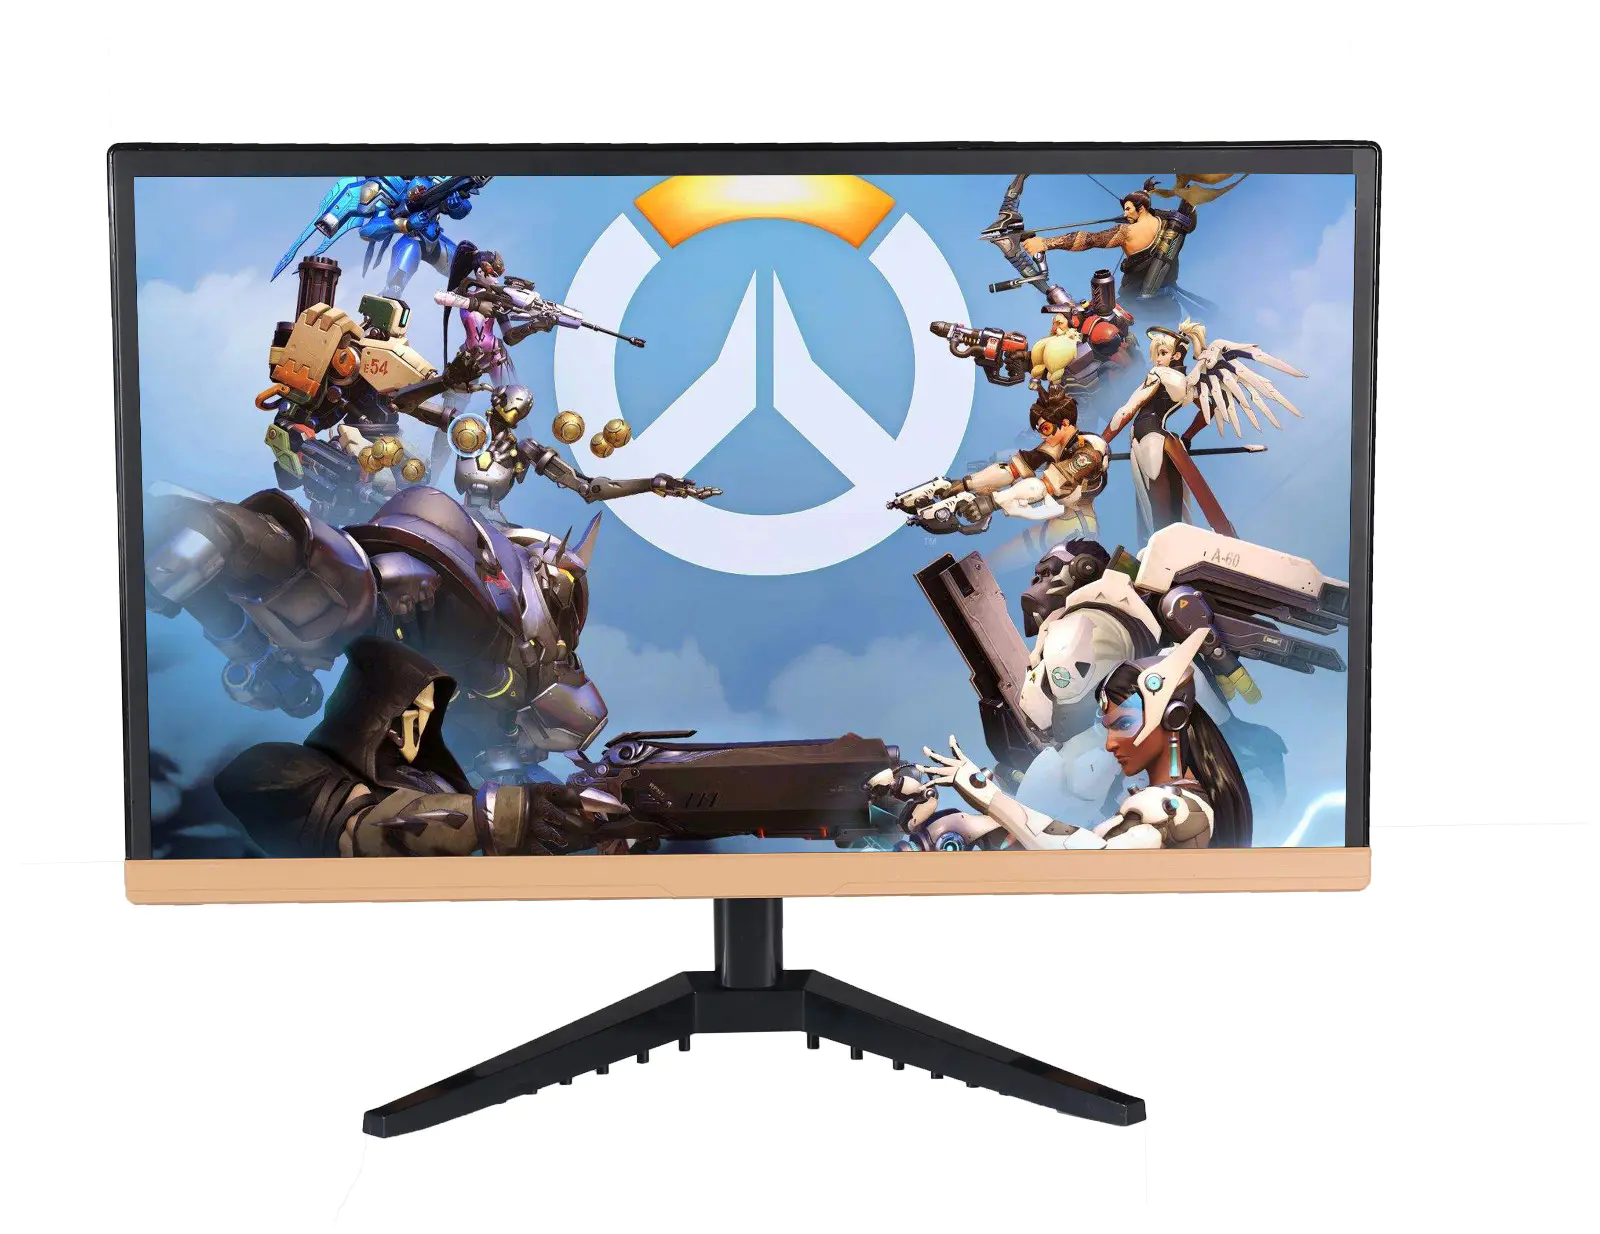 gaming 24 inch monitors for sale oem service for lcd screen